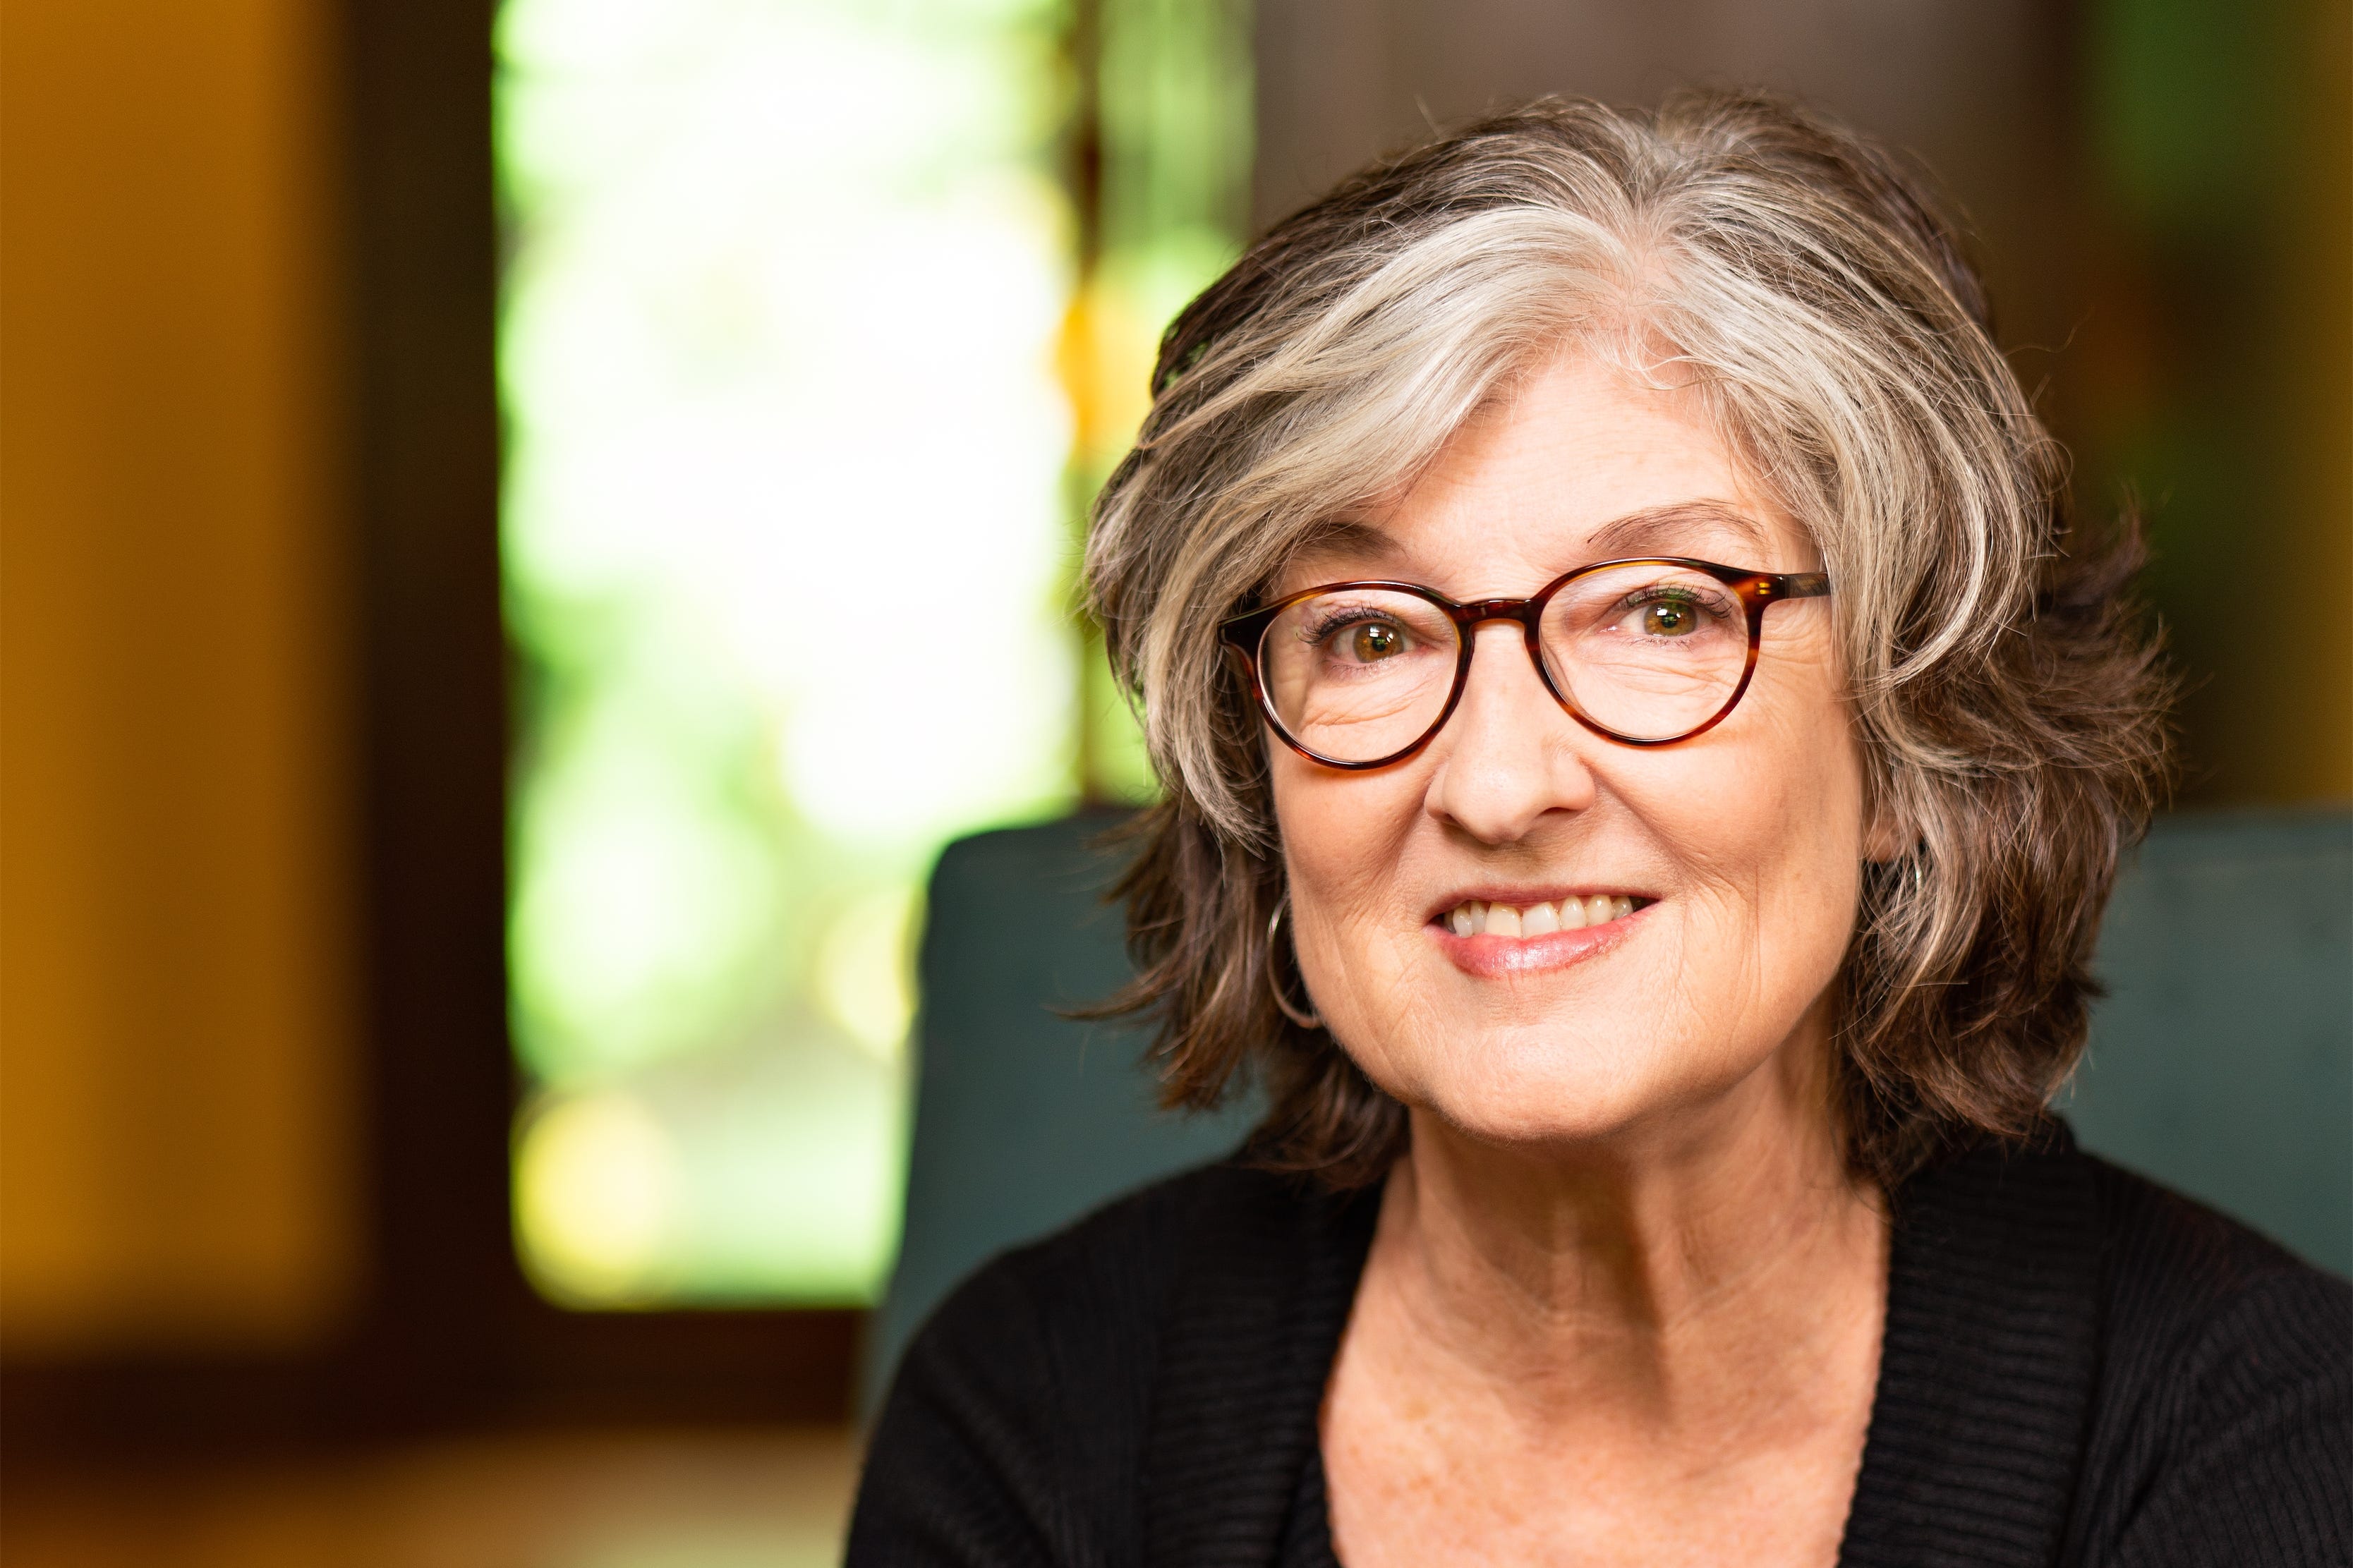 Barbara Kingsolver is the eldest author on this year’s Women’s Prize shortlist (Handout/Evan Kafka/PA)